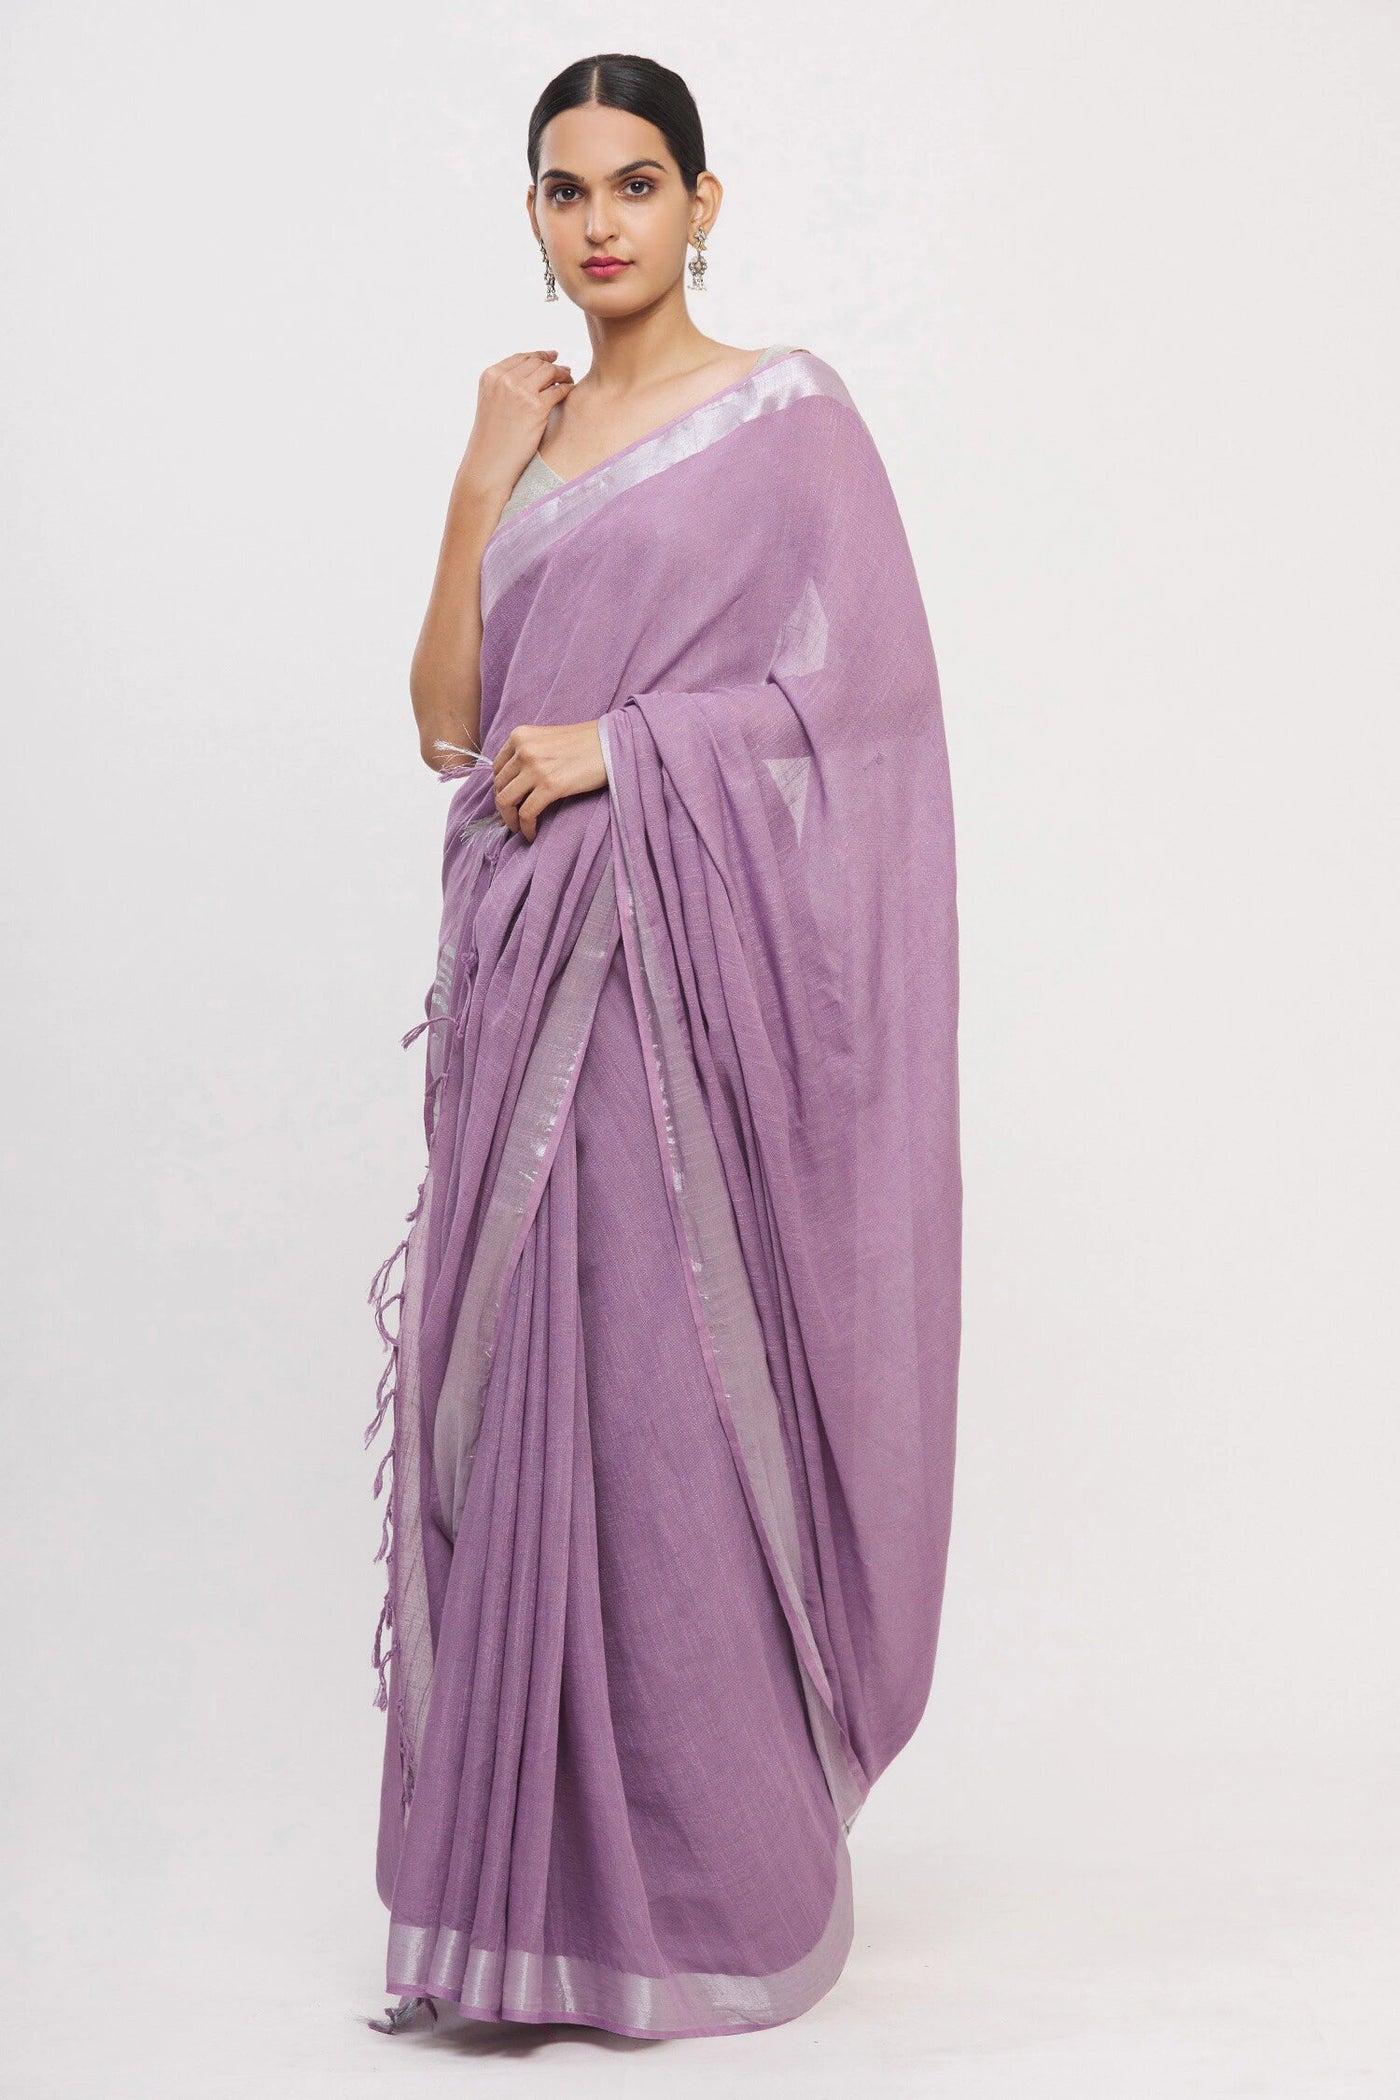 Purple Linen Blend Saree - Indian Clothing in Denver, CO, Aurora, CO, Boulder, CO, Fort Collins, CO, Colorado Springs, CO, Parker, CO, Highlands Ranch, CO, Cherry Creek, CO, Centennial, CO, and Longmont, CO. Nationwide shipping USA - India Fashion X